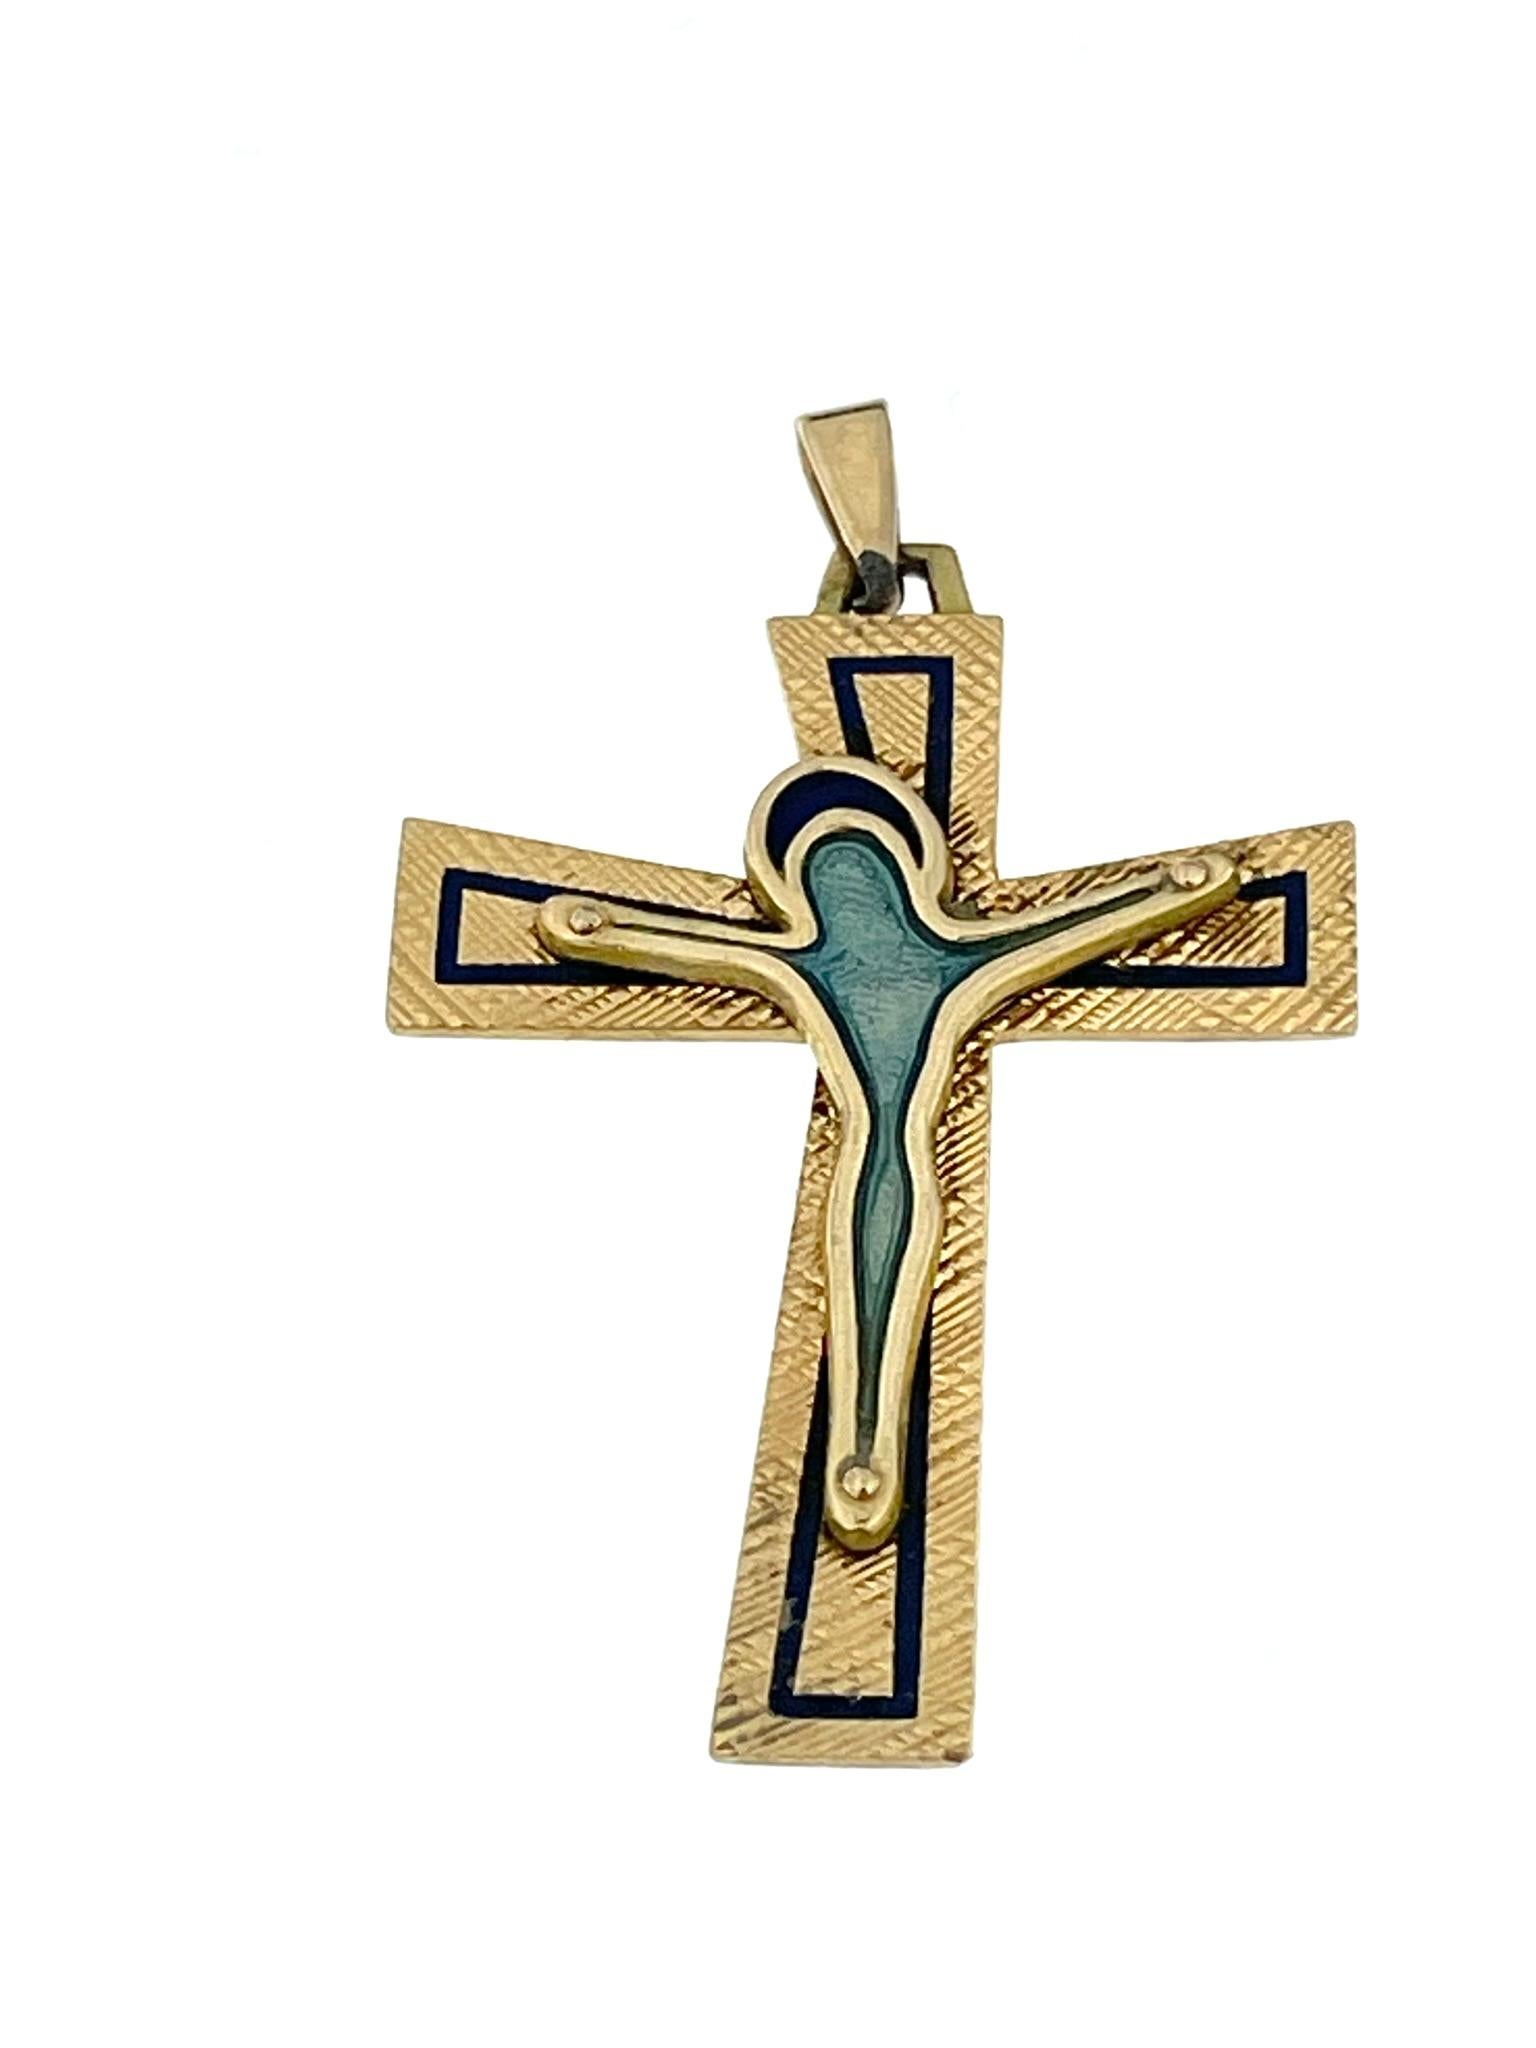 The Belle-Époque Spanish Crucifix is a remarkable piece of religious jewelry characterized by its historical aesthetic and meticulous craftsmanship. 

This crucifix is crafted from 18-karat yellow gold, a choice that not only imparts a rich, warm